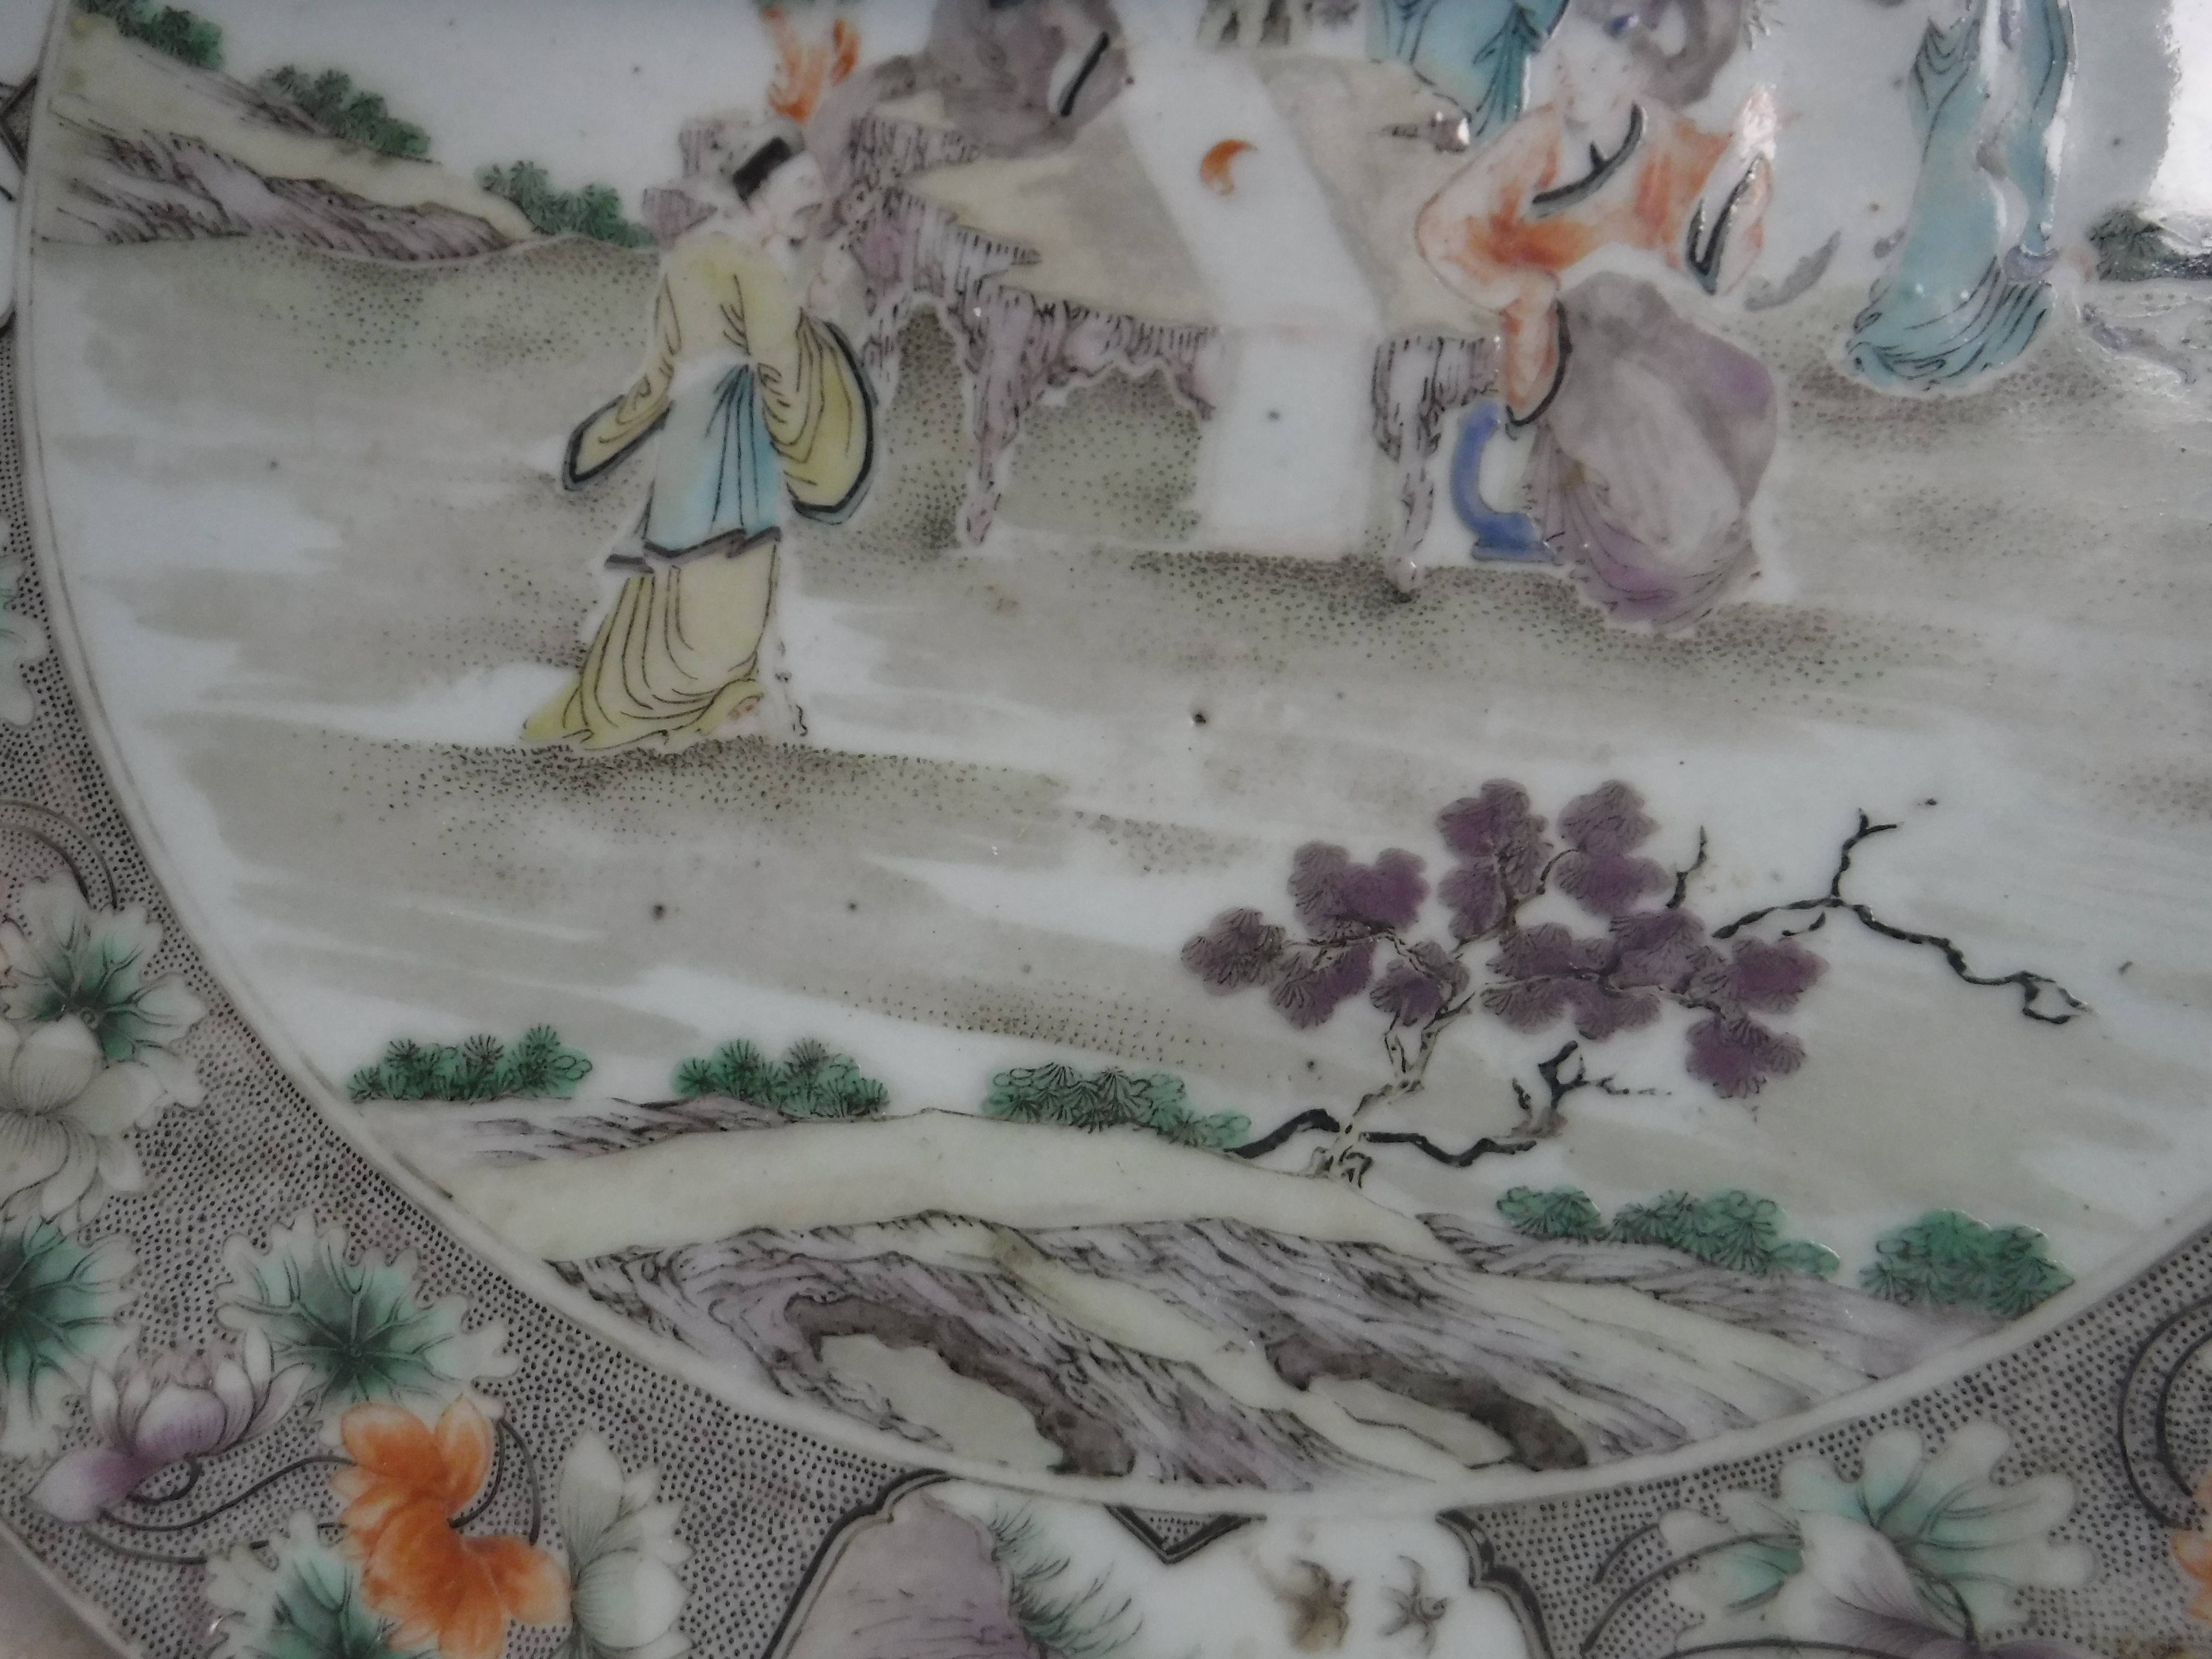 A Kangxi style porcelain charger decorated with figures around a table in a garden setting within a - Image 10 of 14